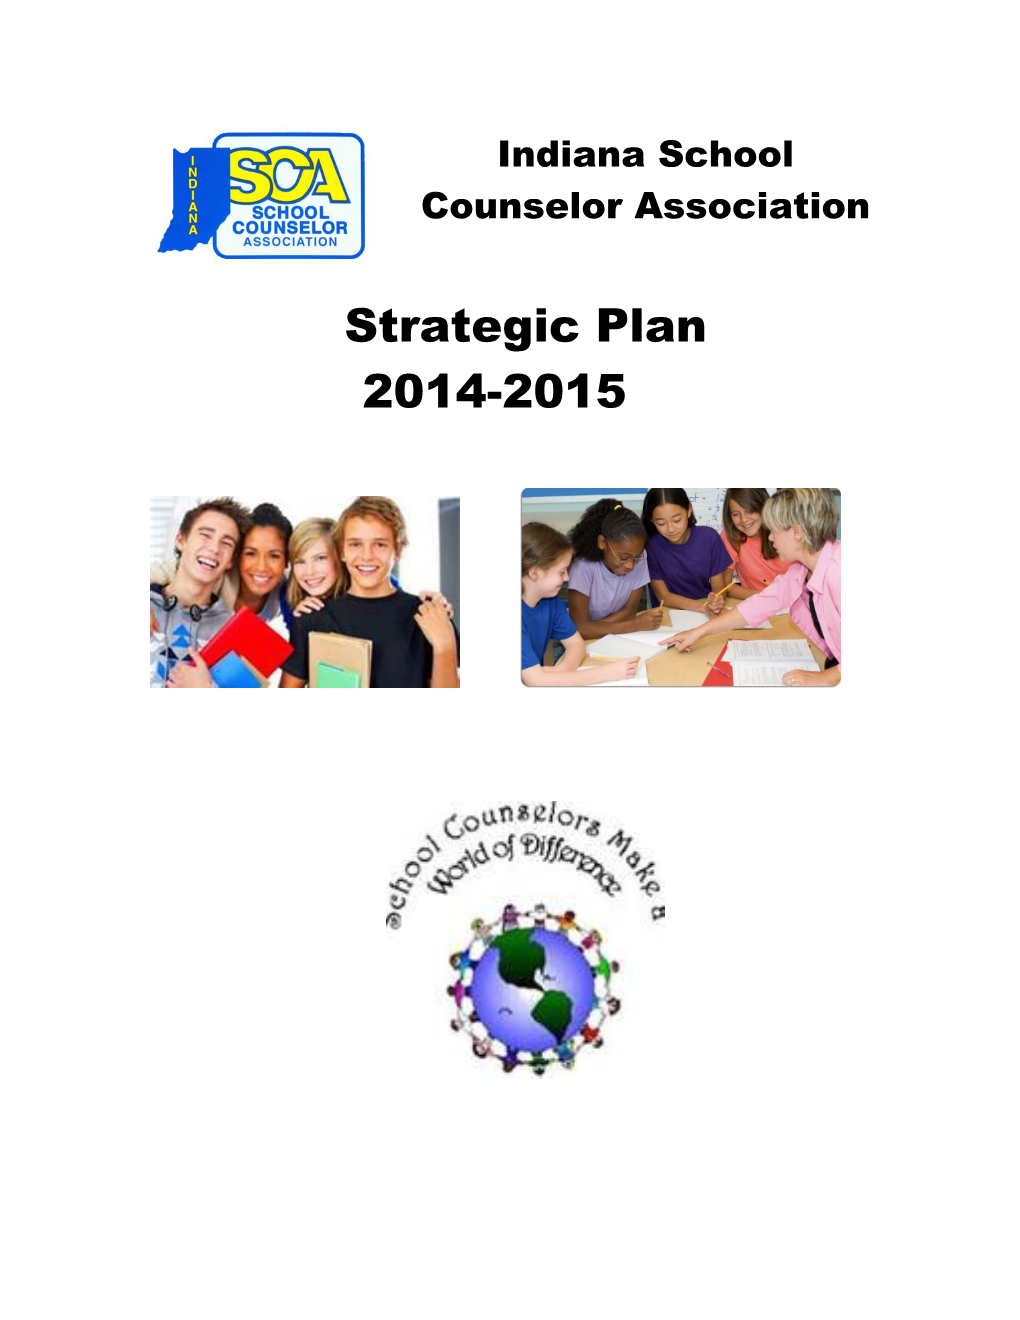 The Indiana School Counselor Association (ISCA) Promotes Student Success Through Advocacy